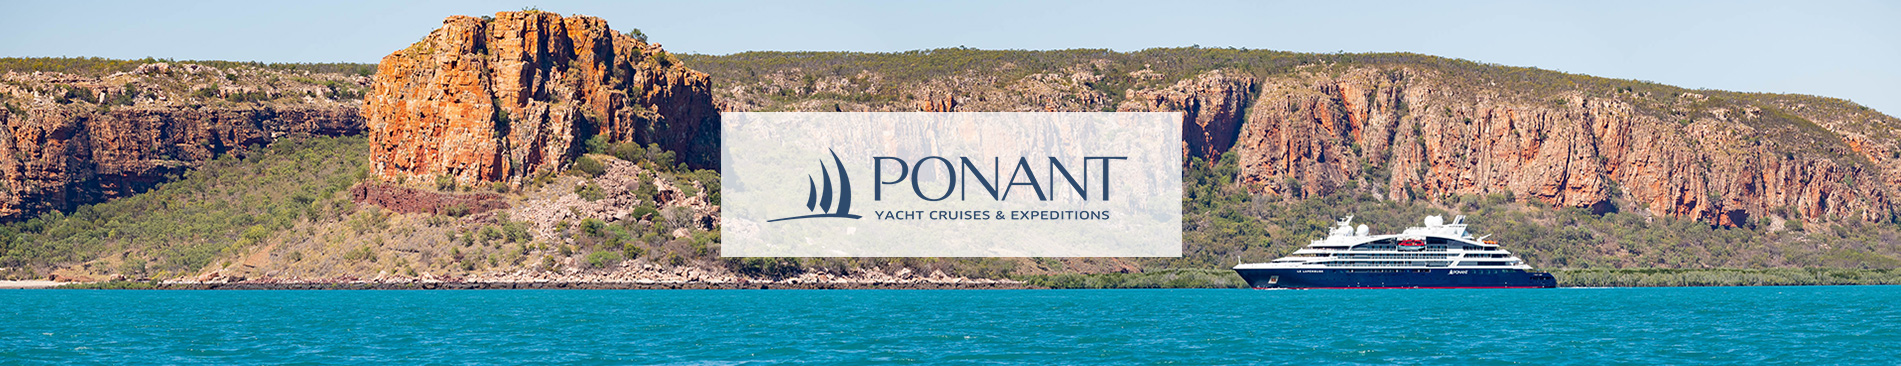 CruiseAlong is your Ponant cruise specialist